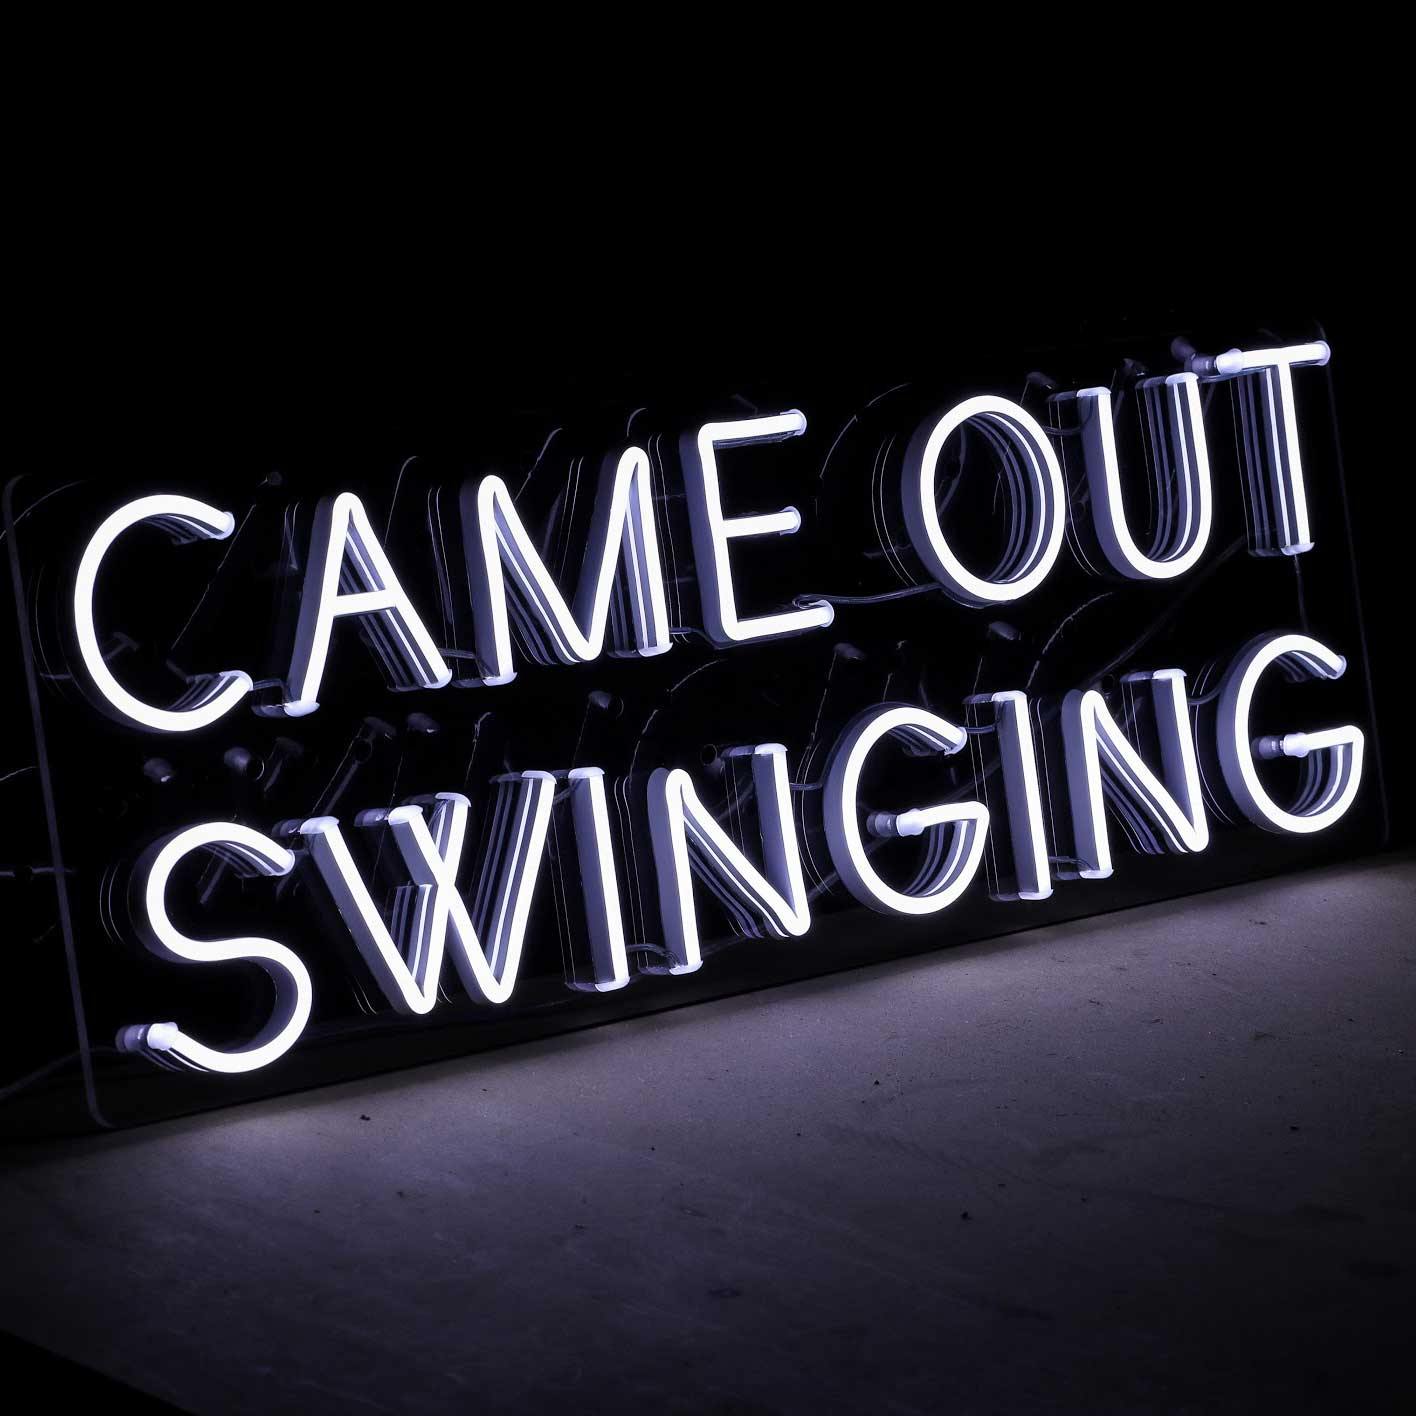 Buy – Came Out Swinging LED Neon Sign – The Wonder Years